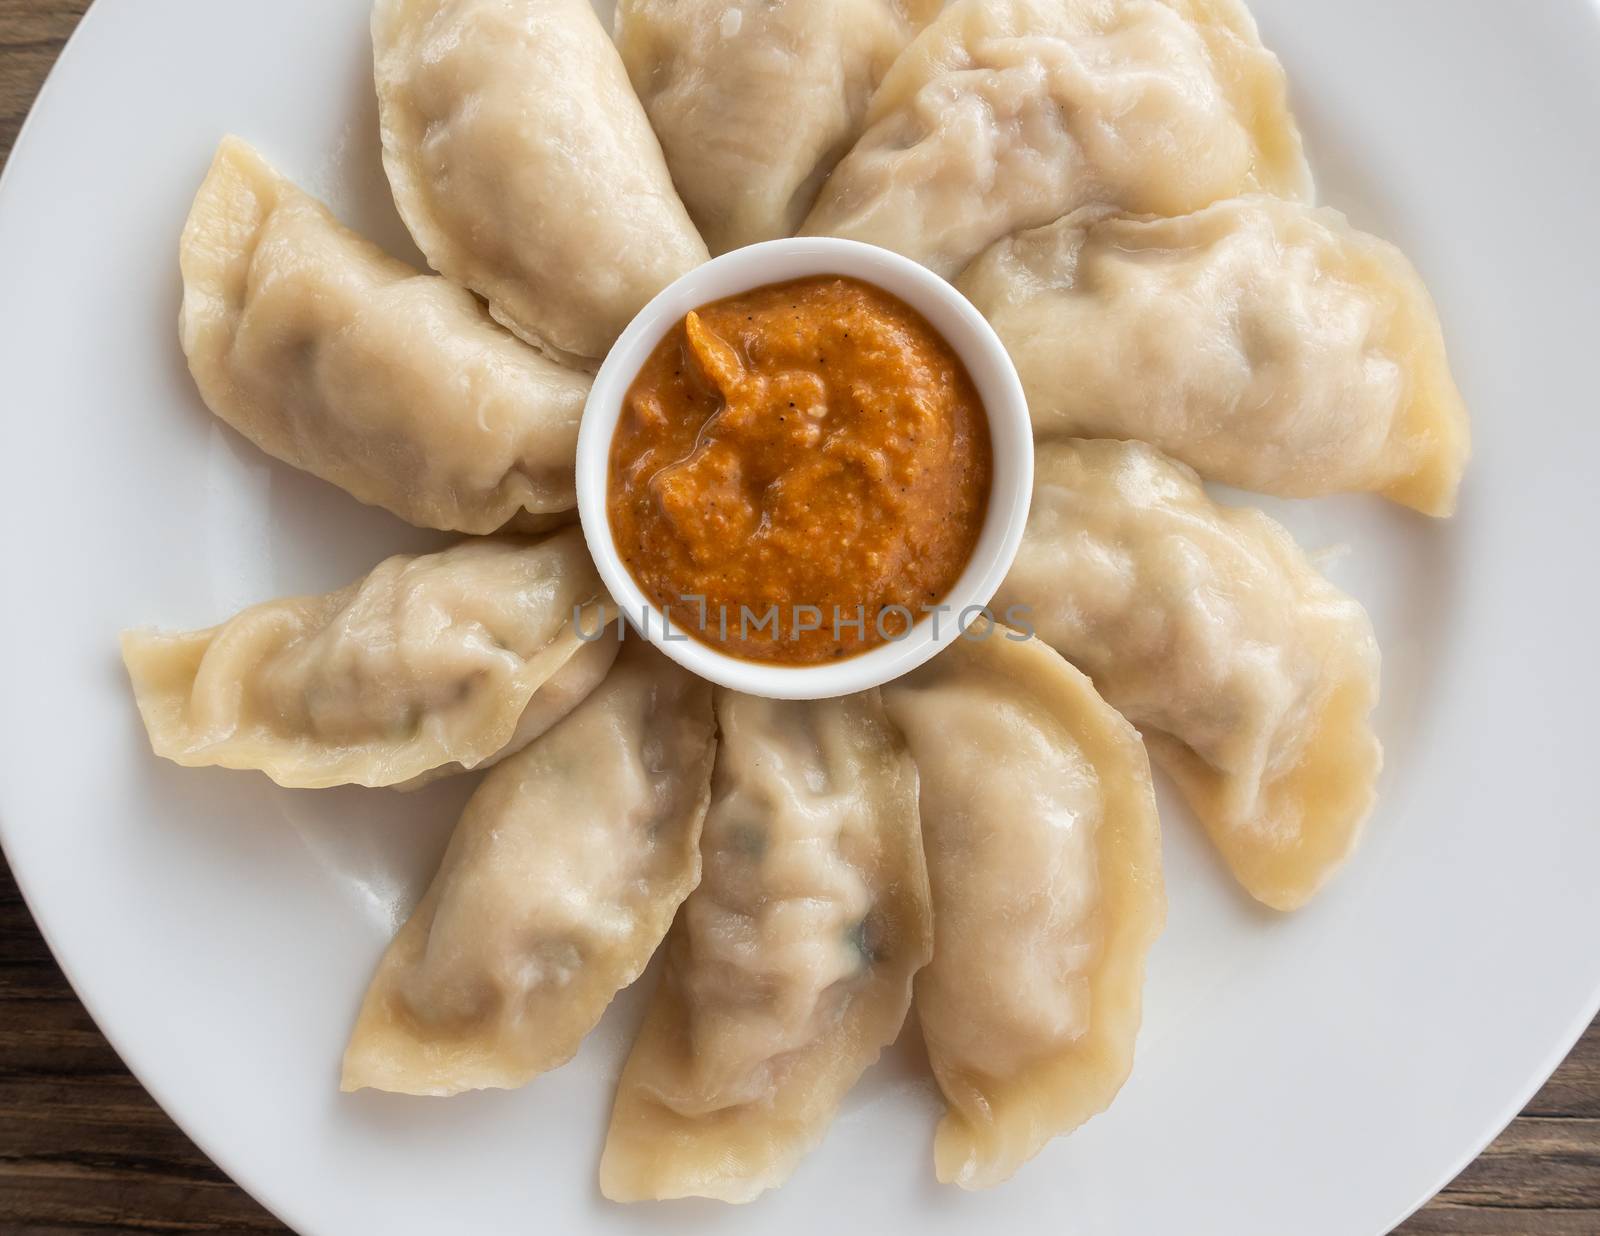 Plate of Nepalese chicken momos and its achar (sauce)